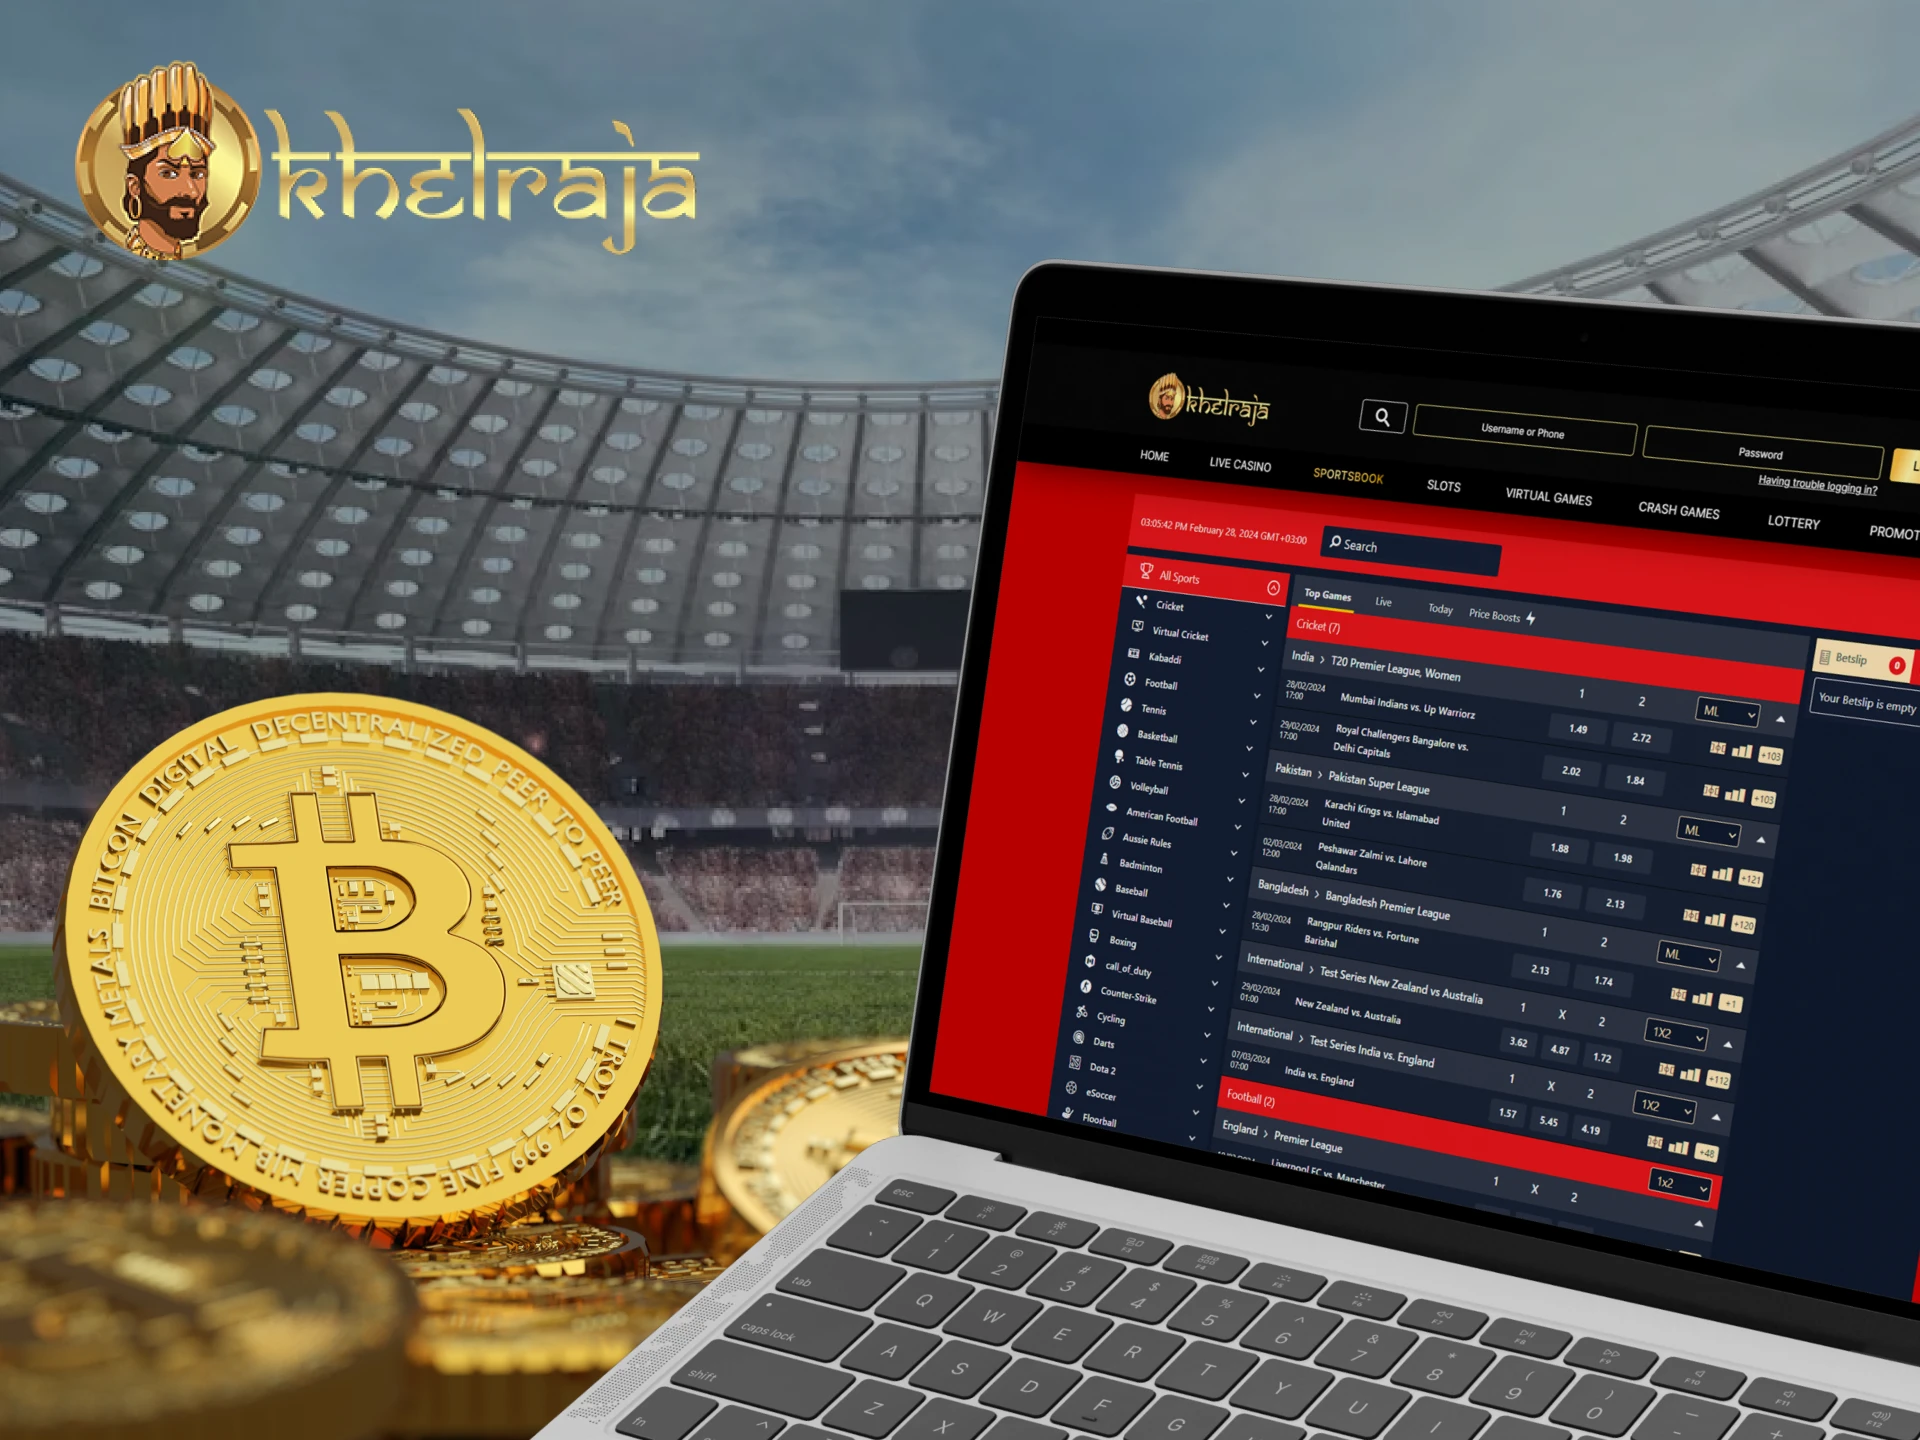 Khelraja offers its users to place bets on sports using cryptocurrency.